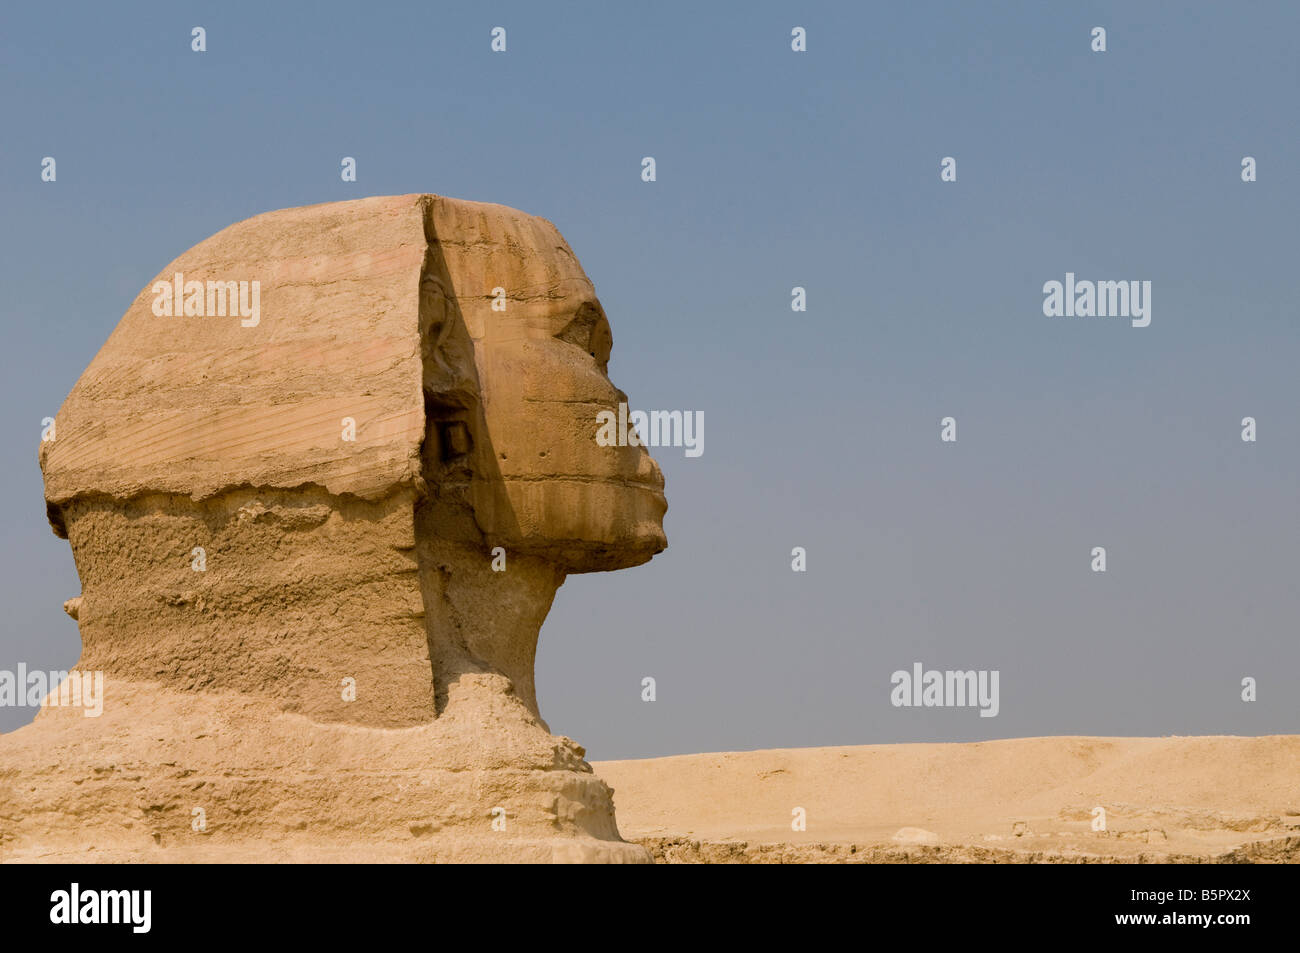 The Great Sphinx of Giza, believed to have been built by ancient Egyptians of the Old Kingdom during the reign of the Pharaoh Khafre Cairo Egypt Stock Photo